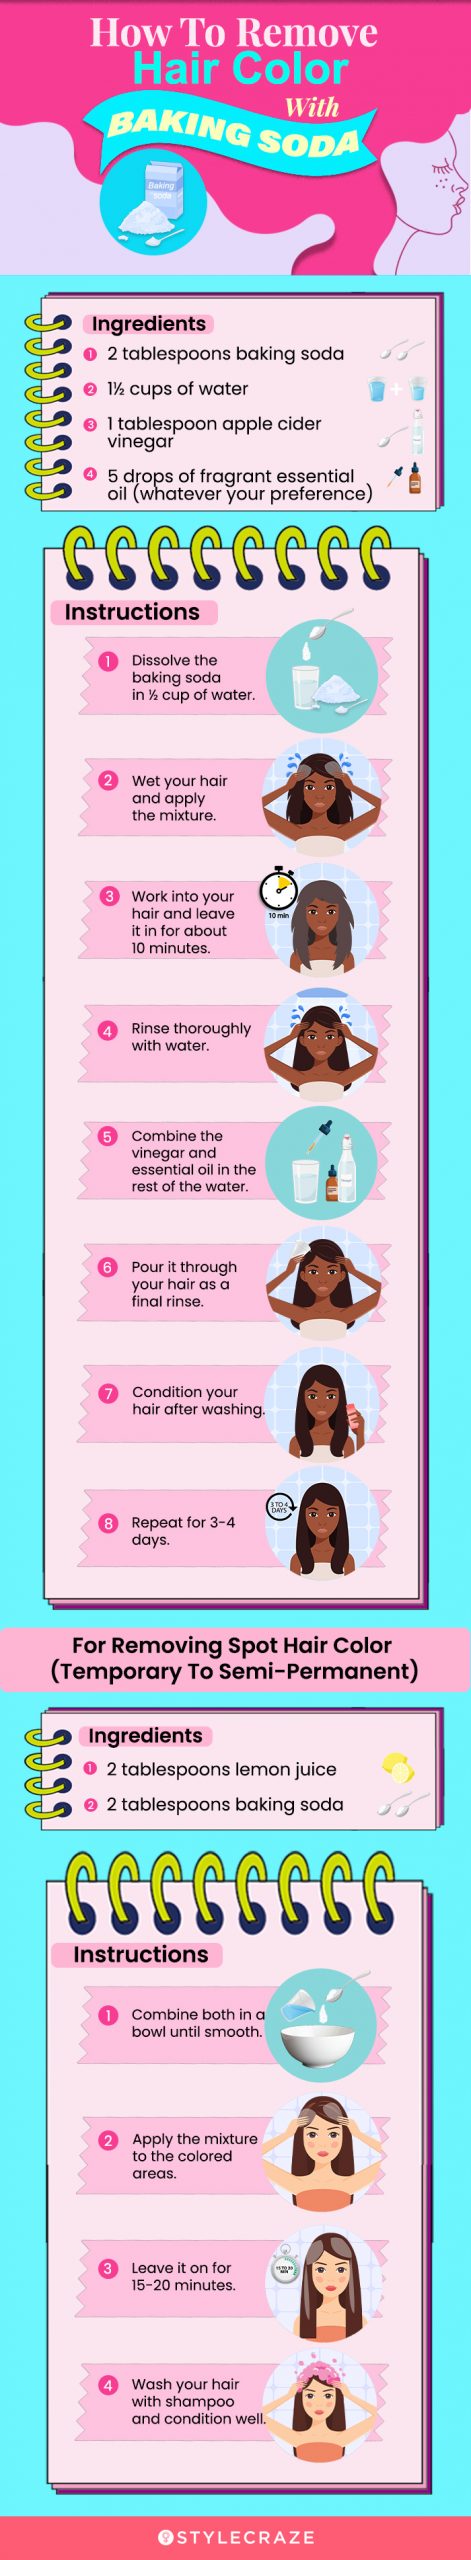 how to remove hair color with baking soda (infographic)